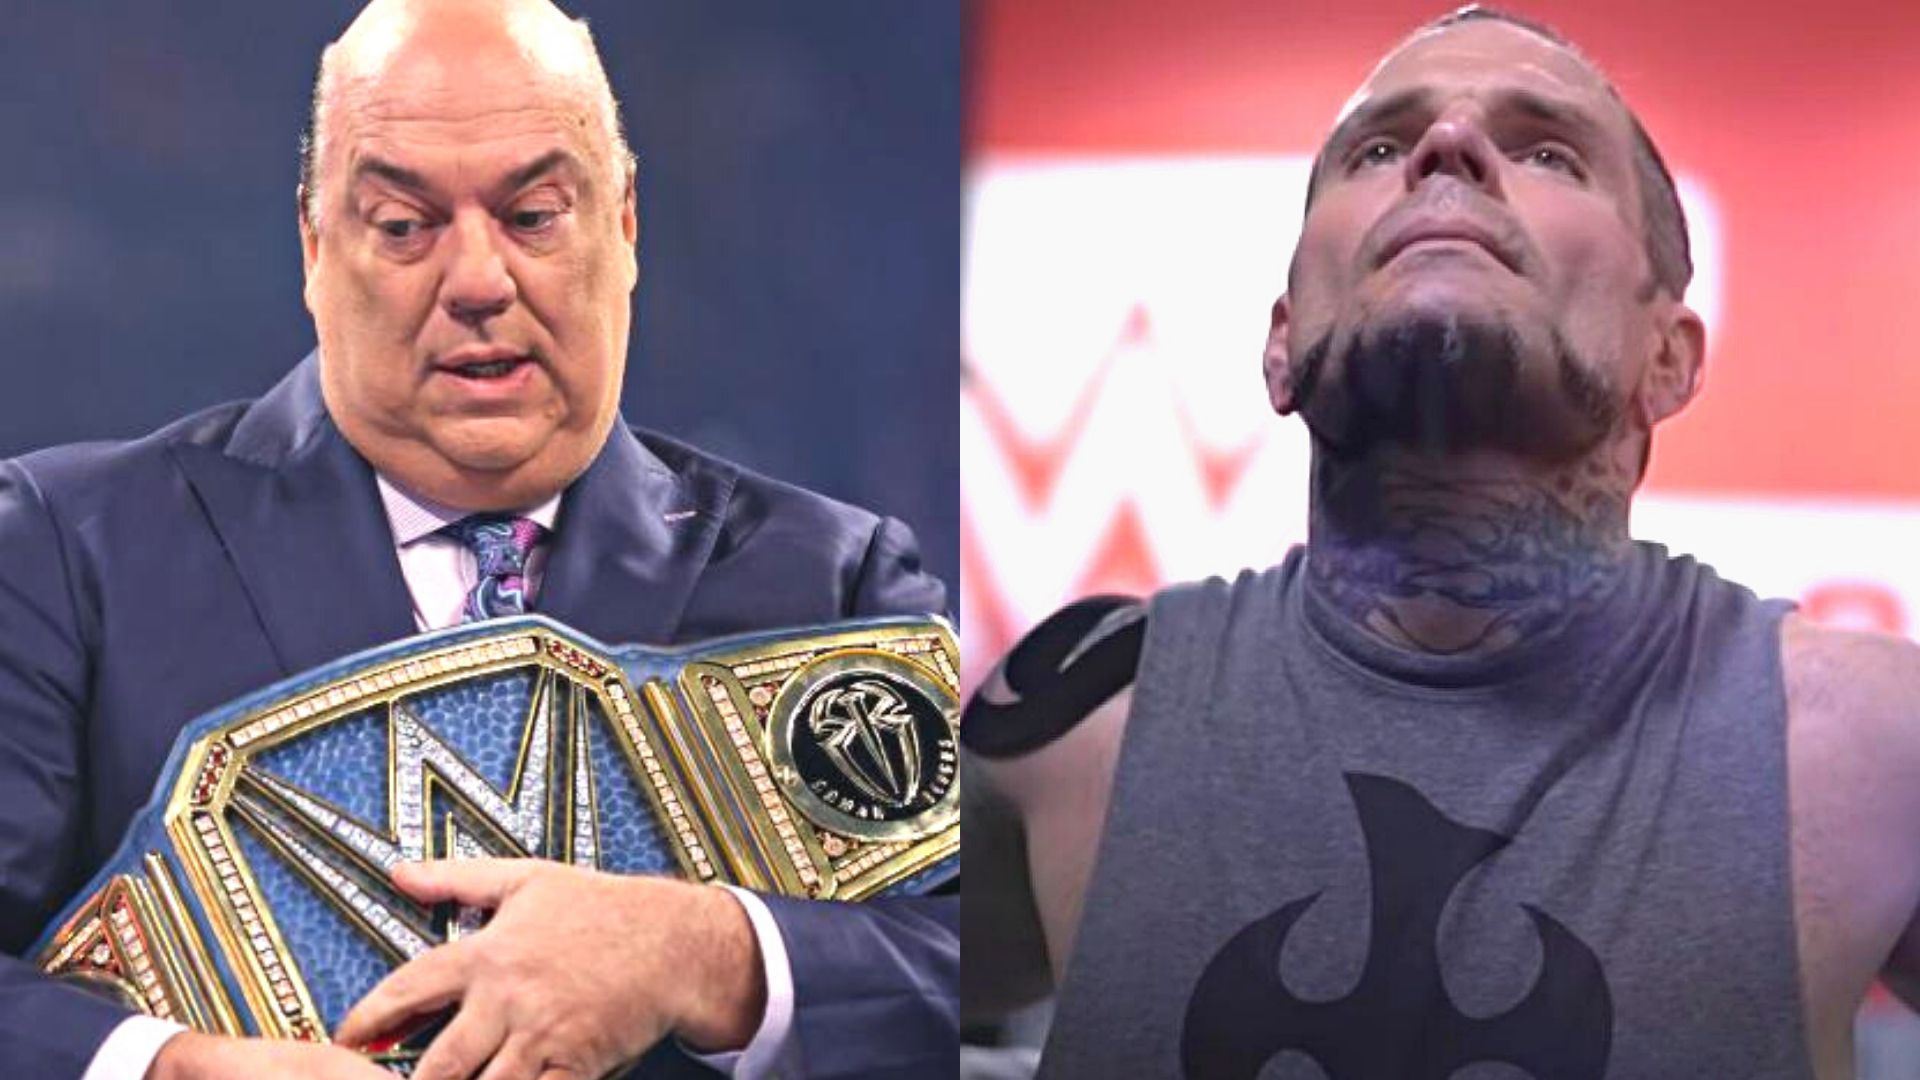 The WWE News &amp; Rumor Roundup features Paul Heyman, Jeff Hardy, and many other big names.